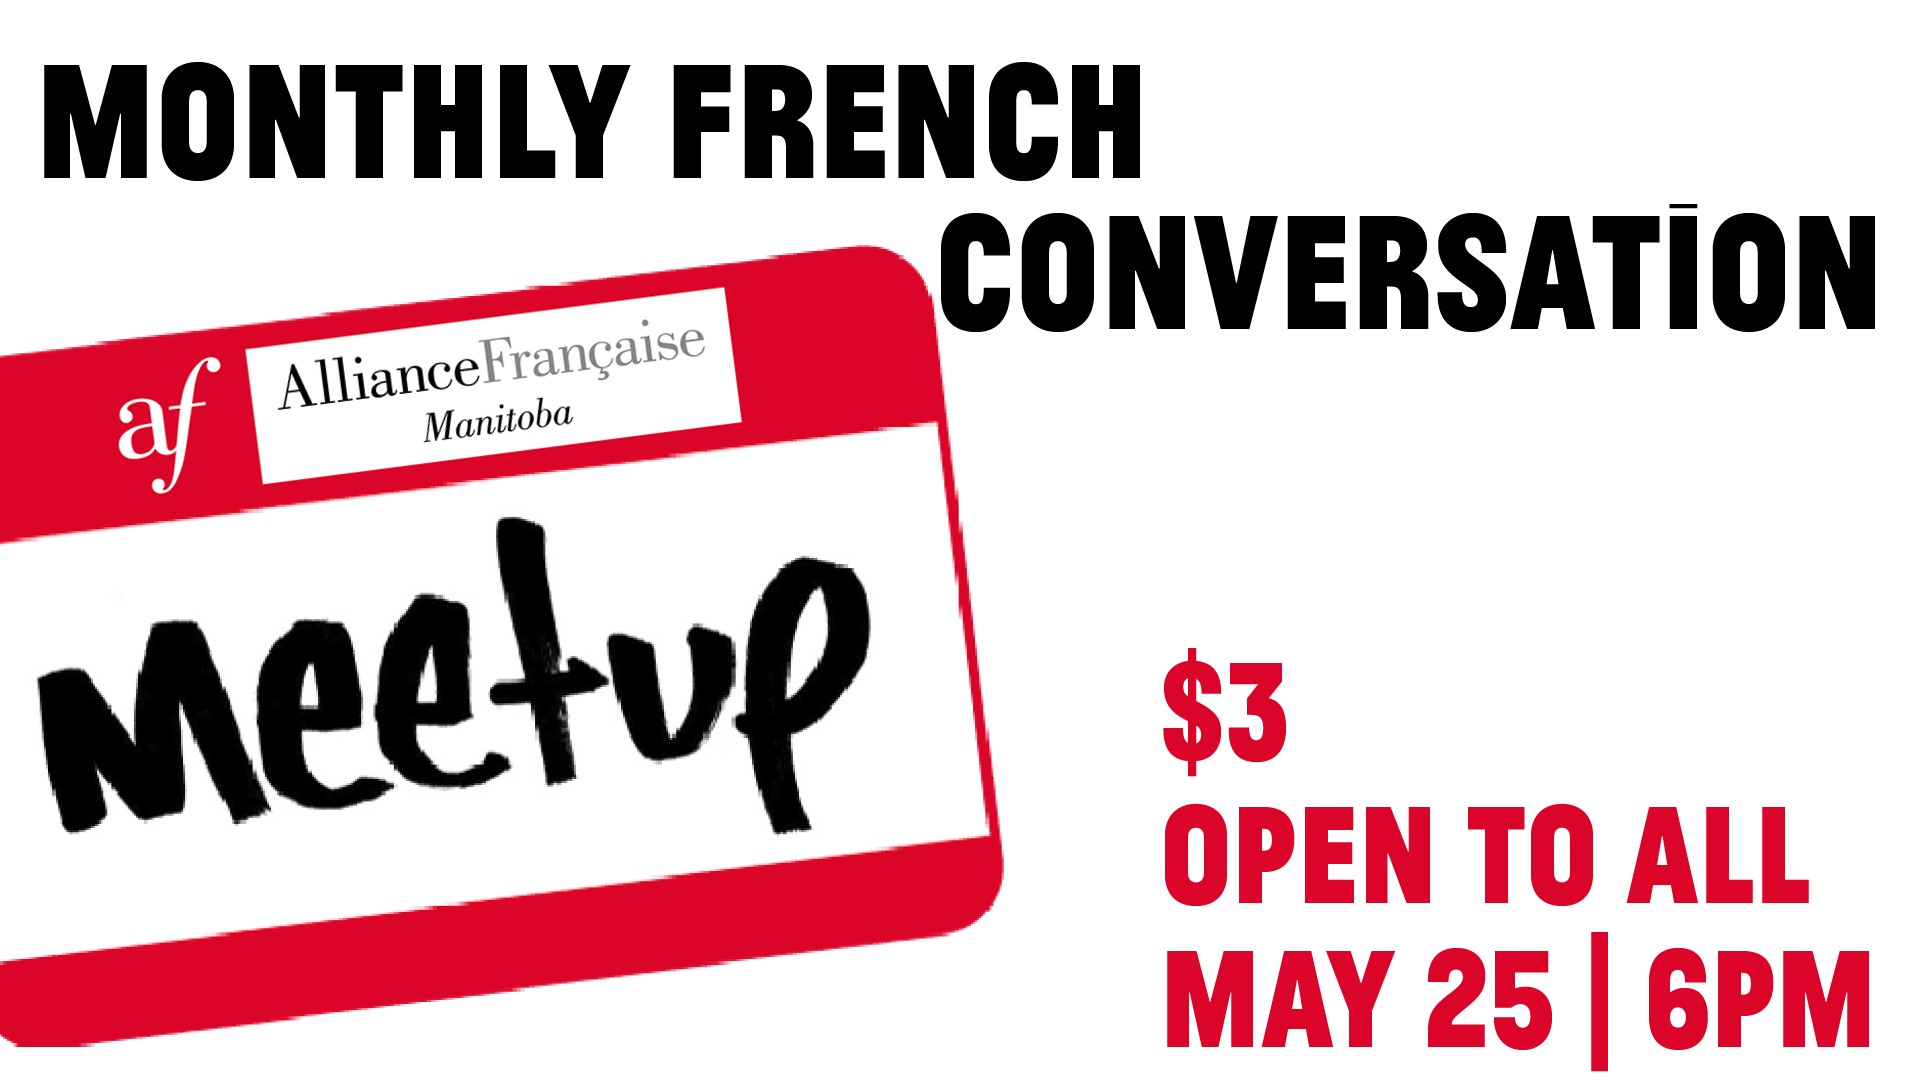 FRENCH CONVERSATION GROUP